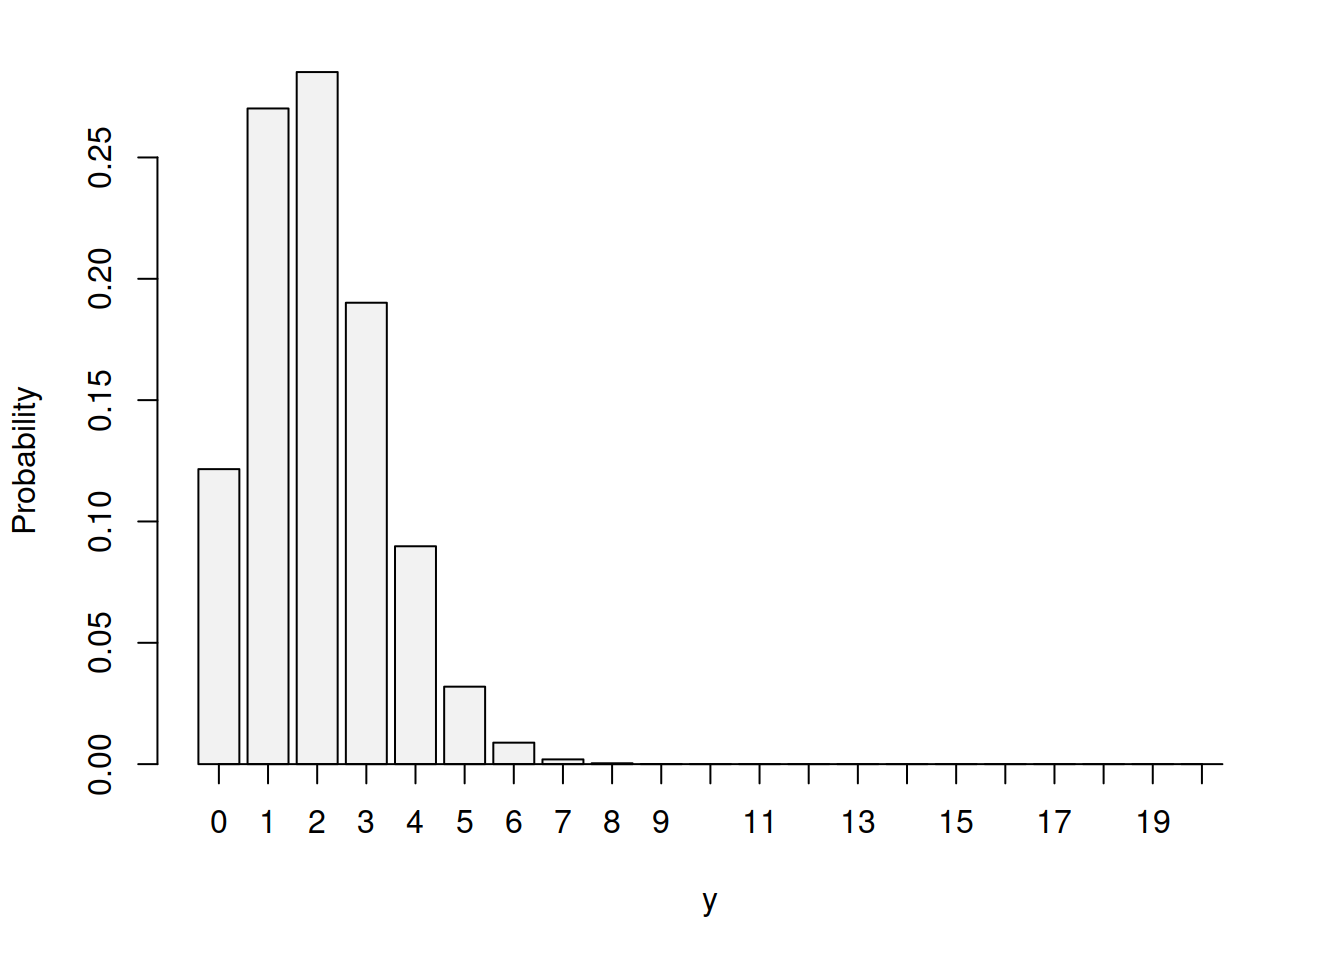 Probability Mass Function for Binomial distribution with p=0.1 and n=20.